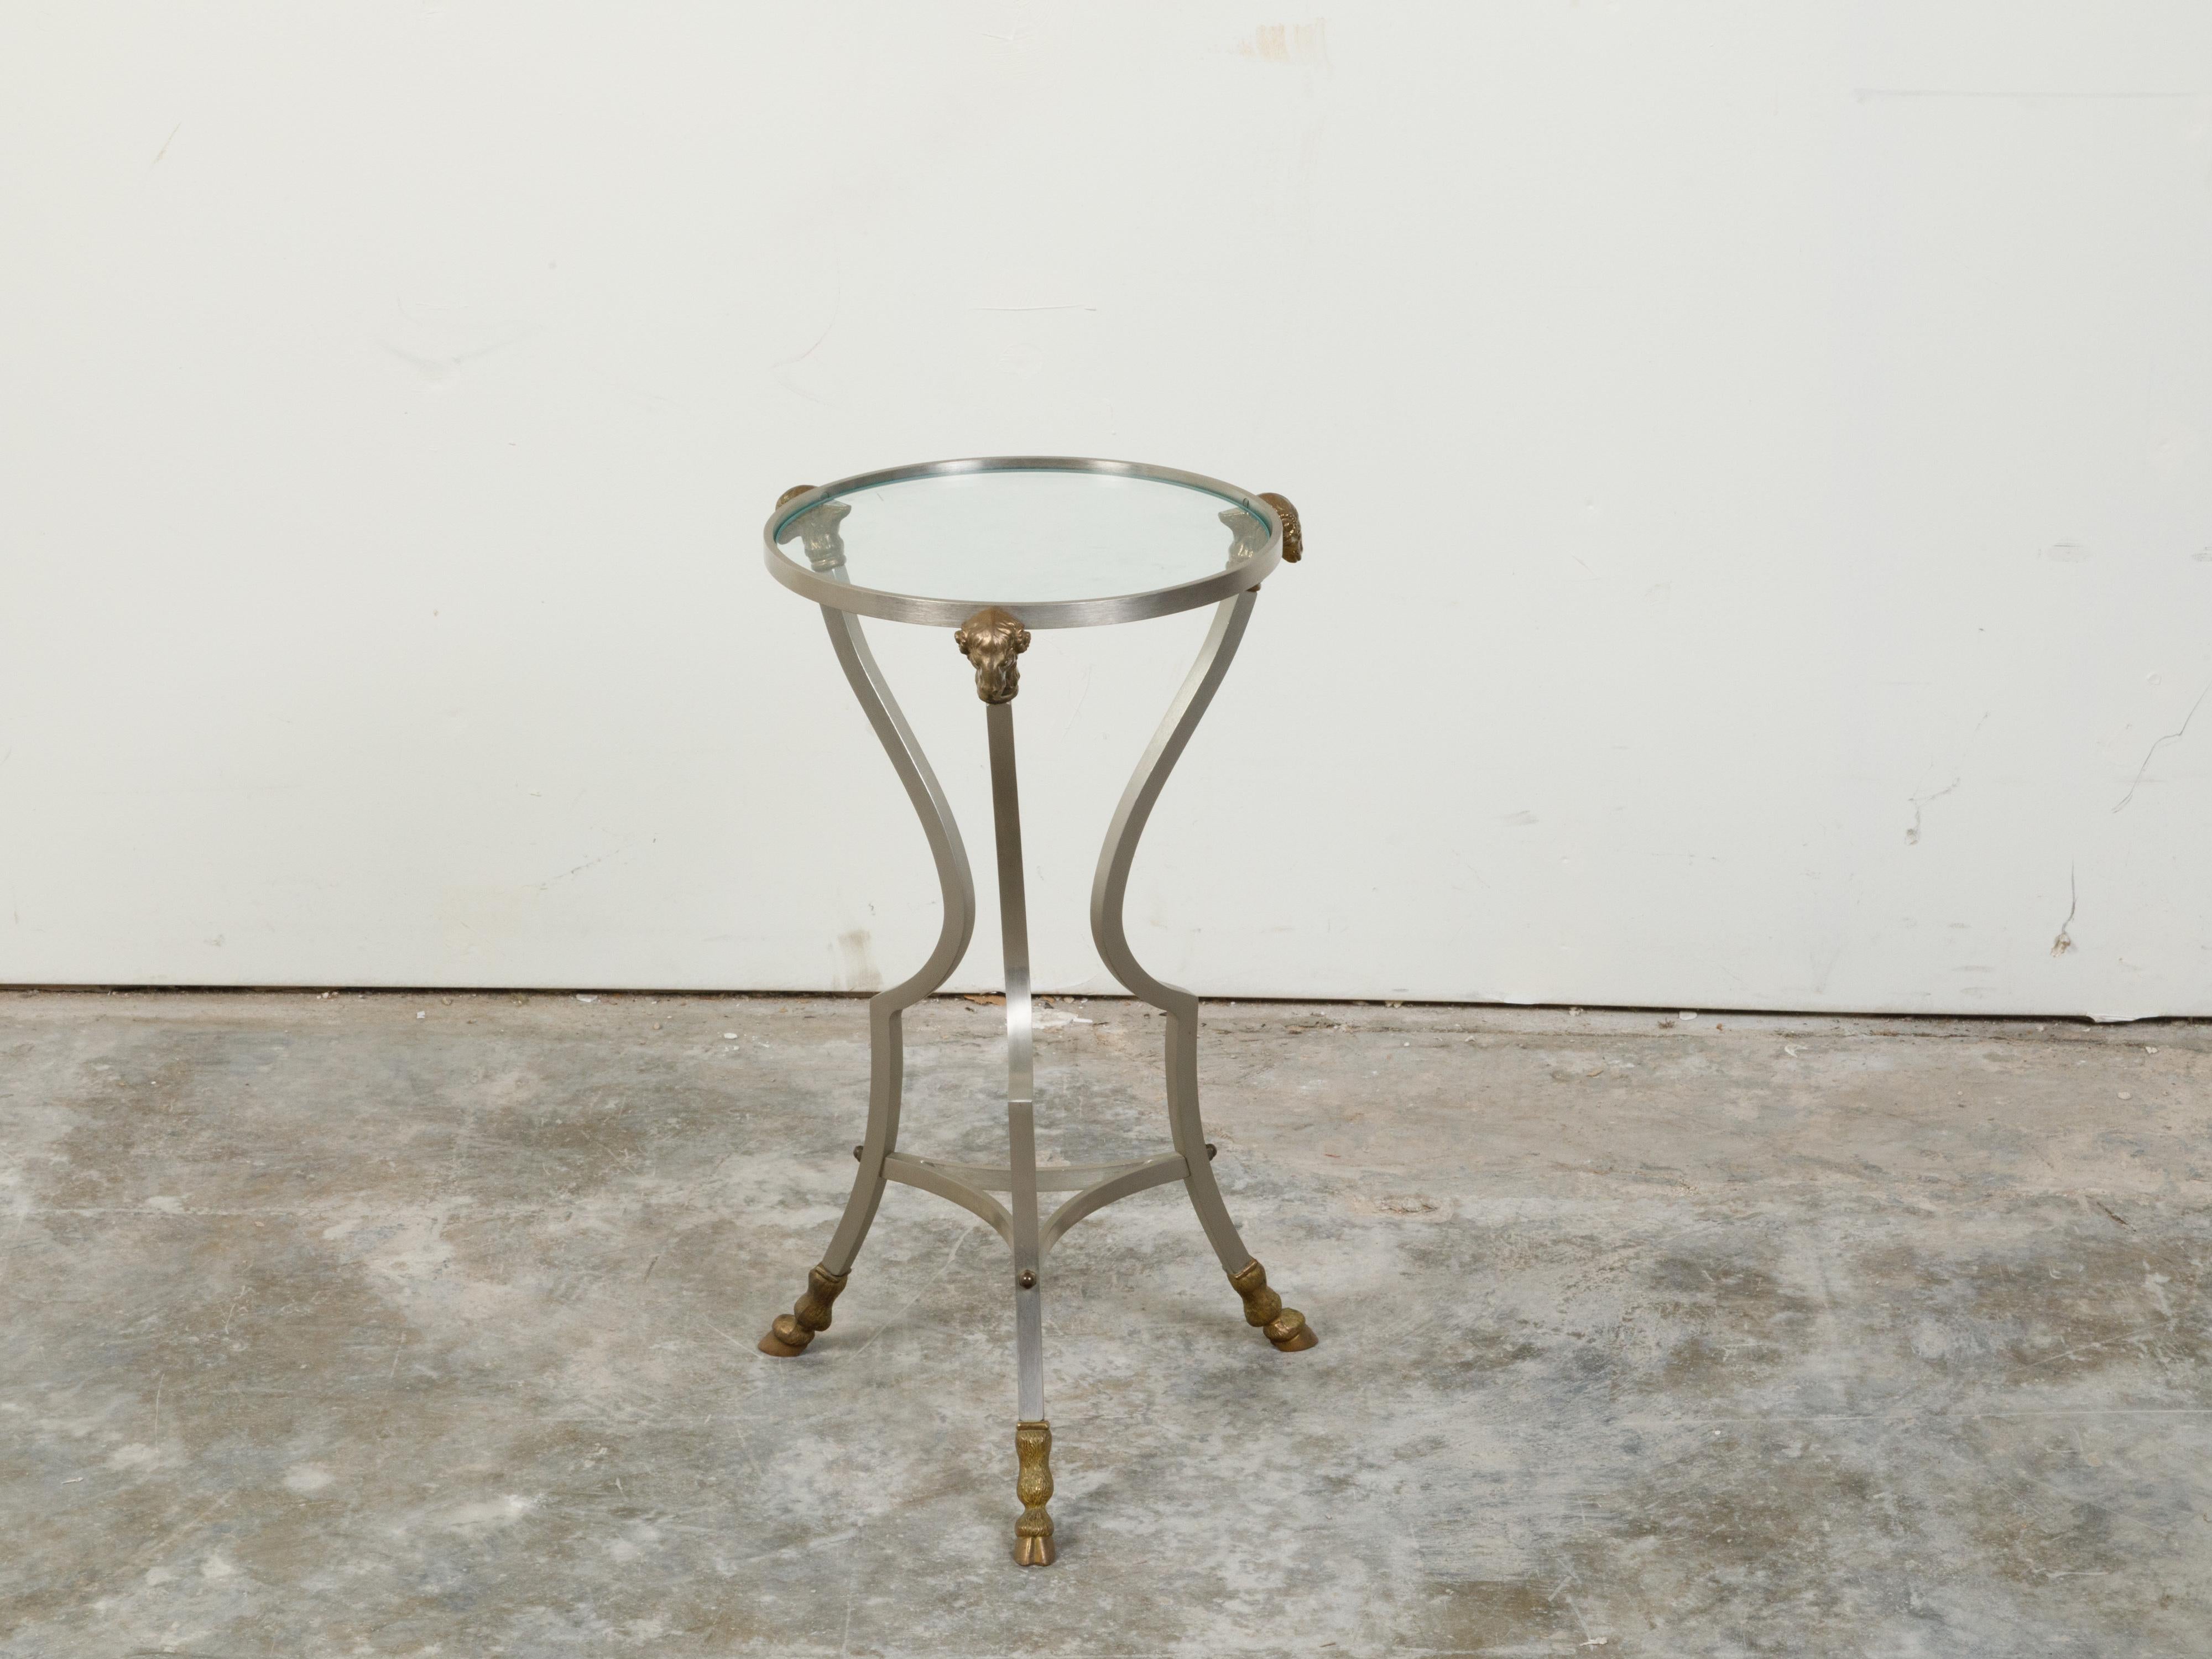 An Italian Directoire style vintage steel side table from the mid 20th century, with brass rams' heads and hoofed feet. Created in Italy during the midcentury period, this side table features a circular glass top supported by three rams' heads.